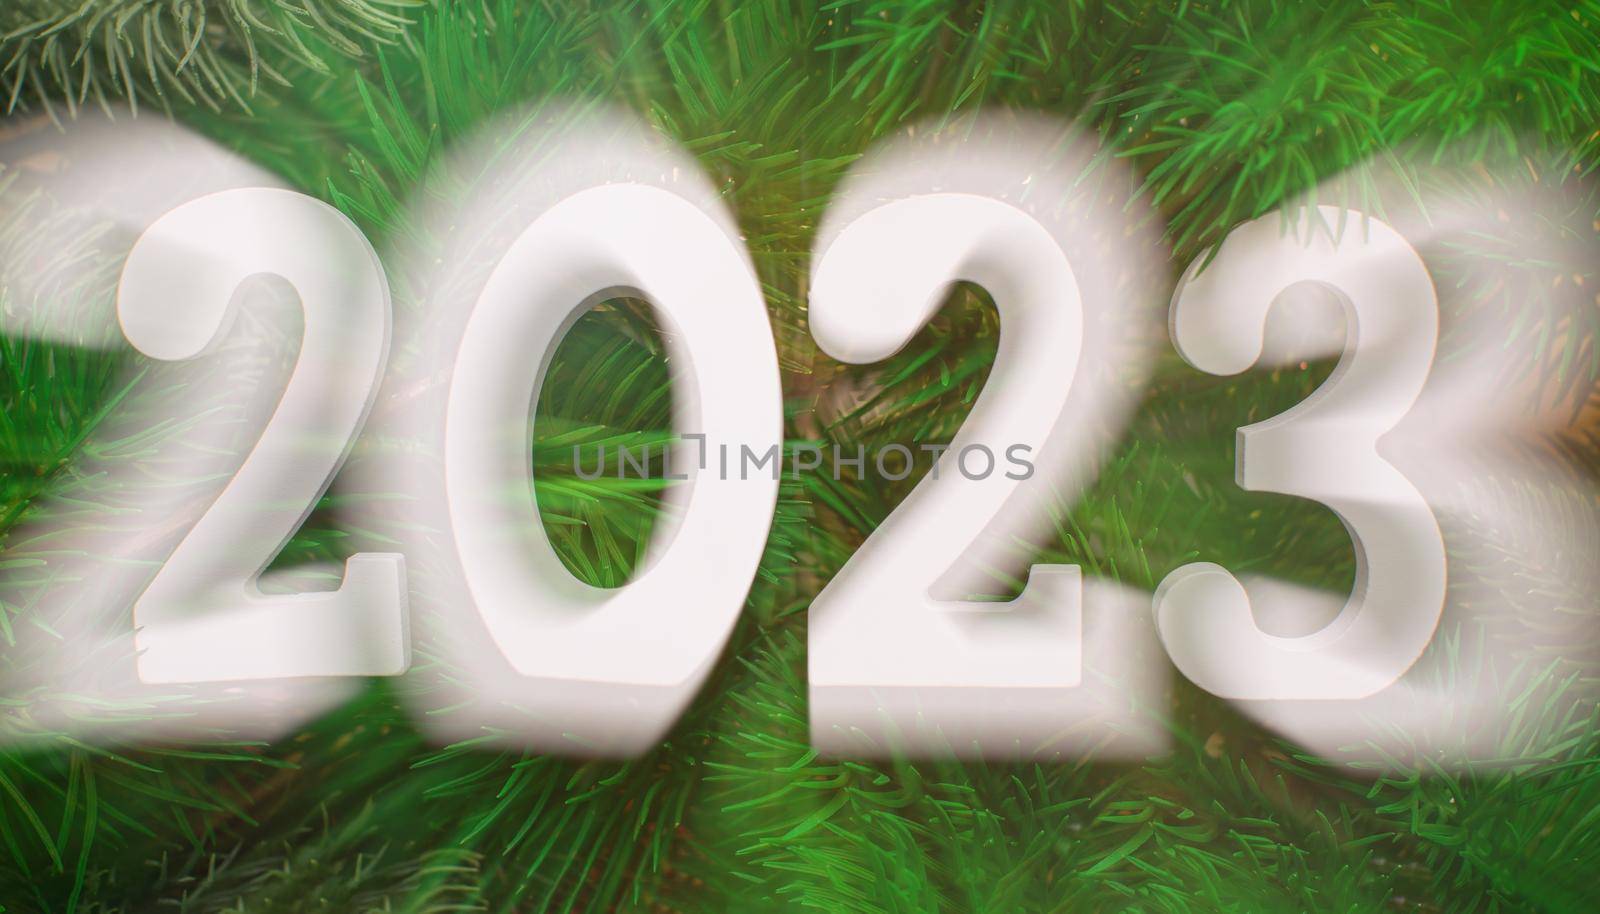 happy new year 2023 background new year holidays card with bright lights by Maximusnd